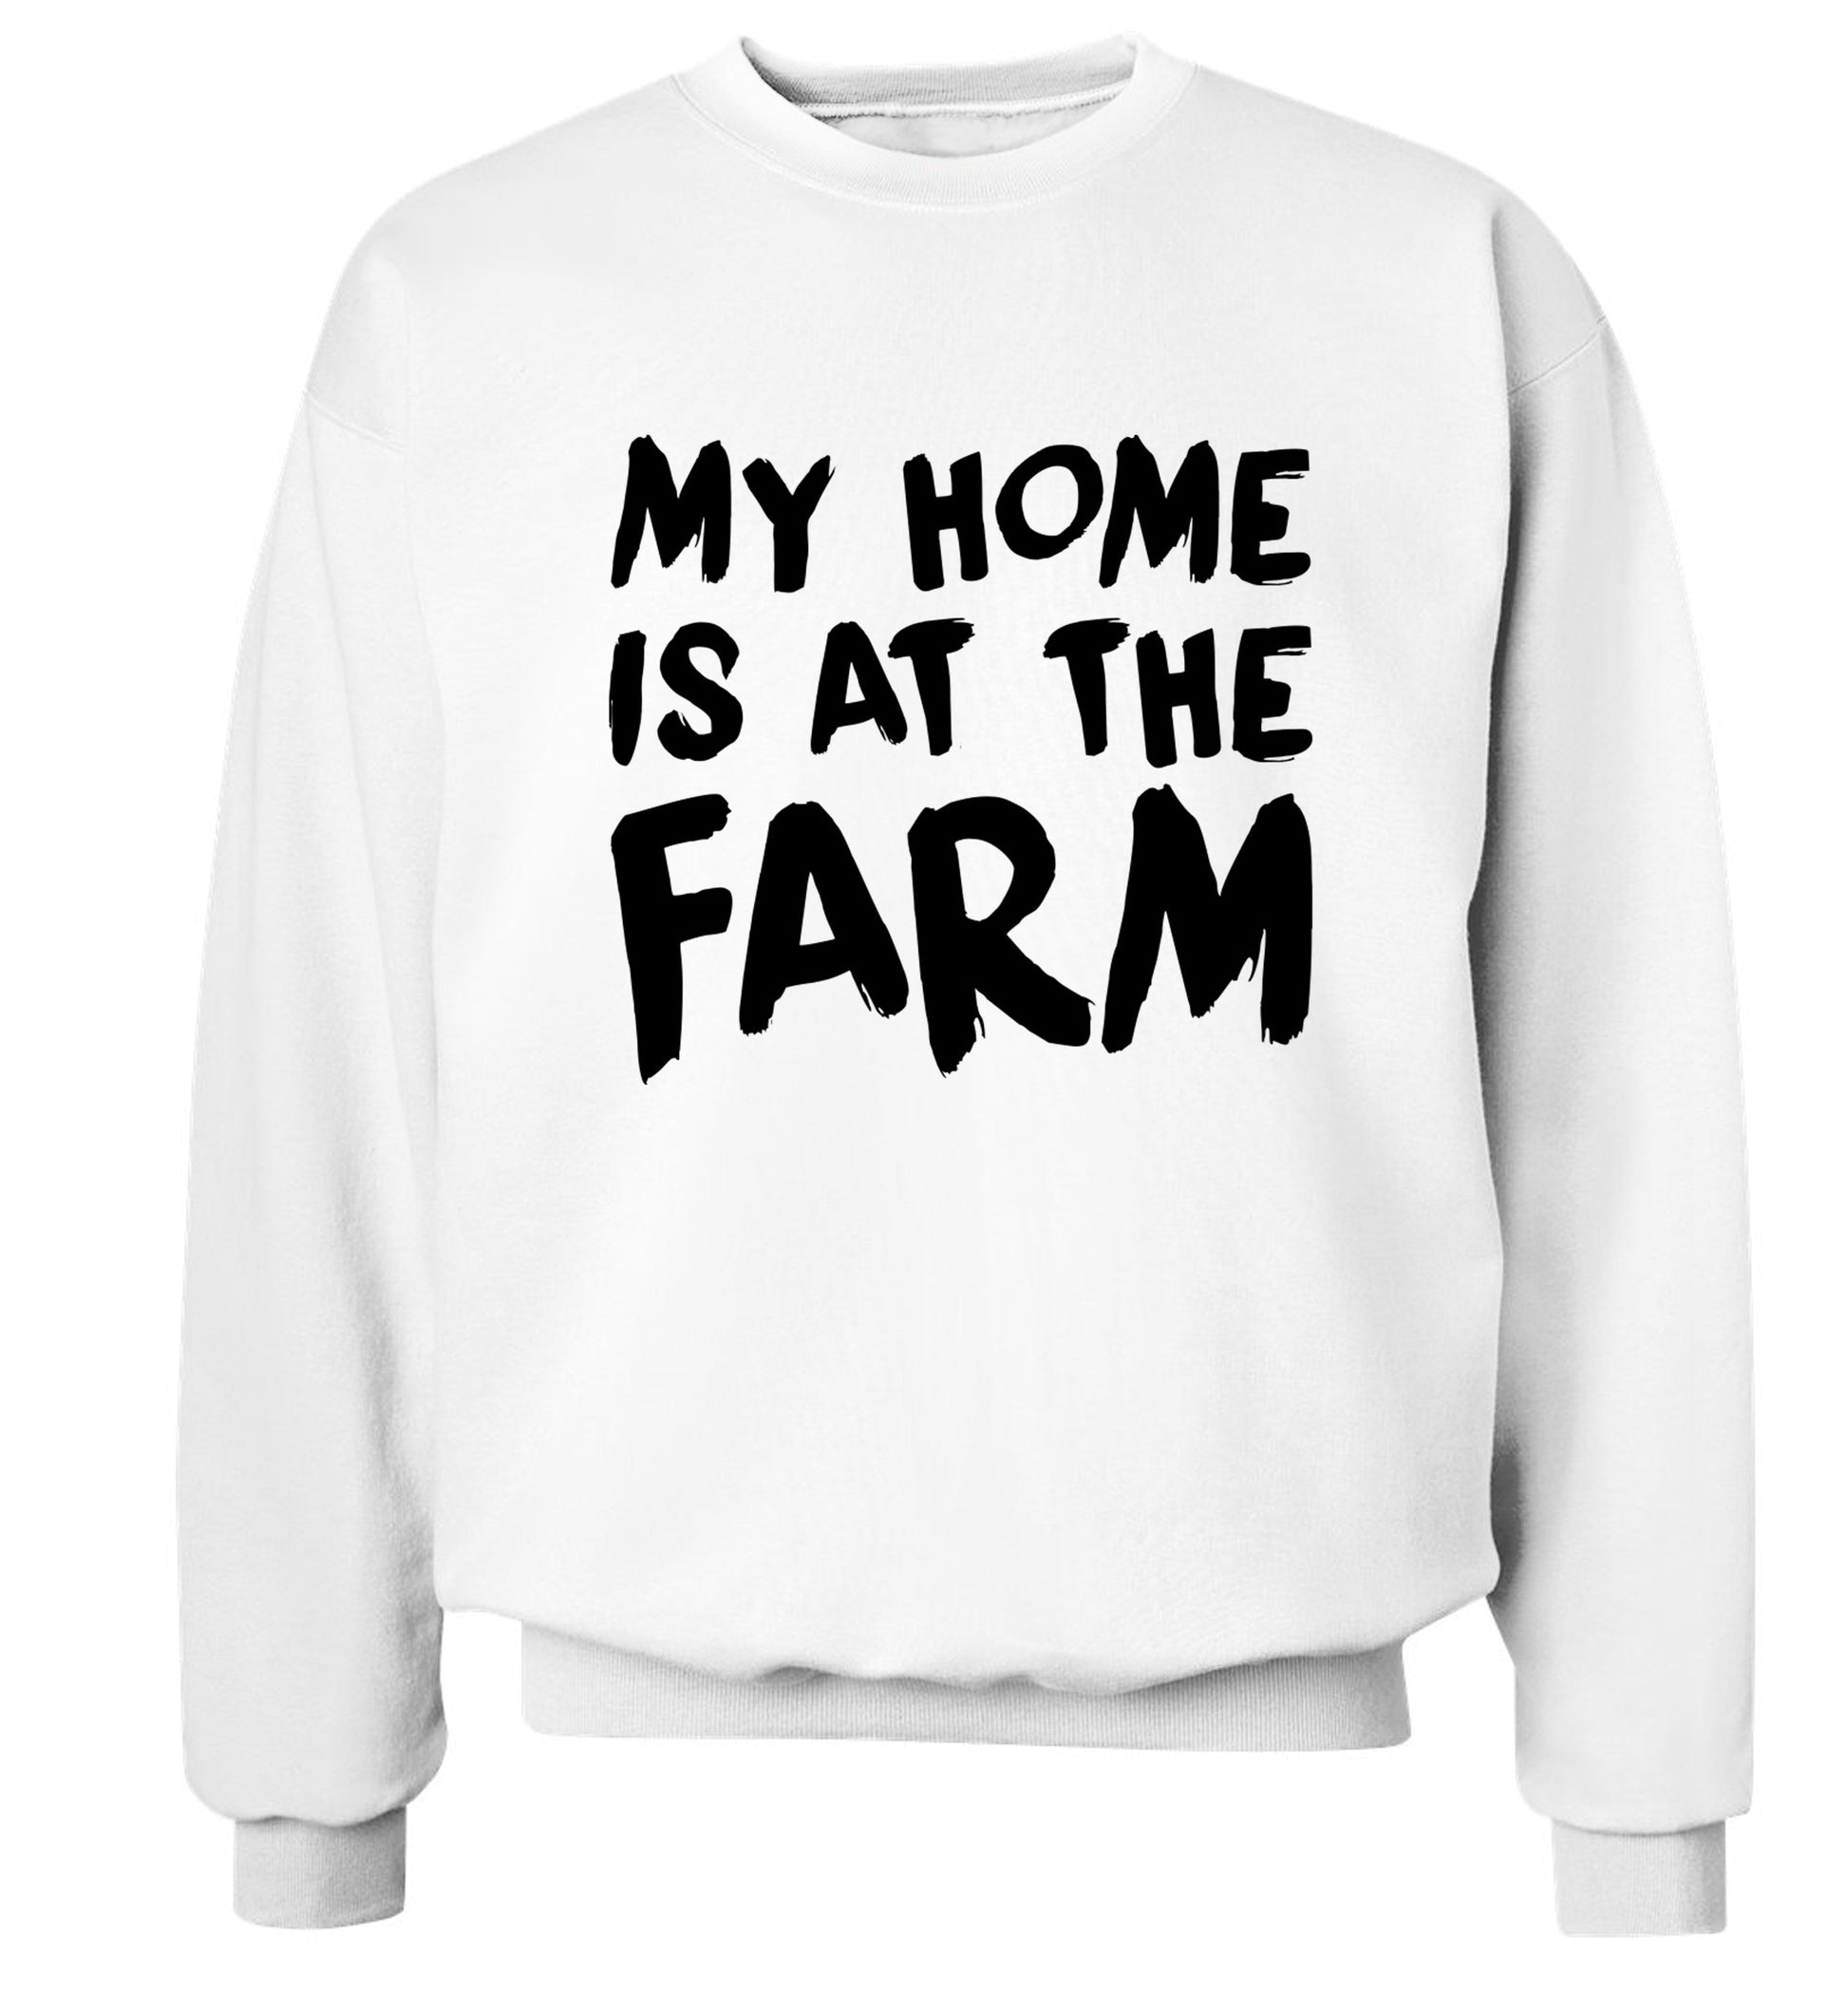 My home is at the farm Adult's unisex white Sweater 2XL